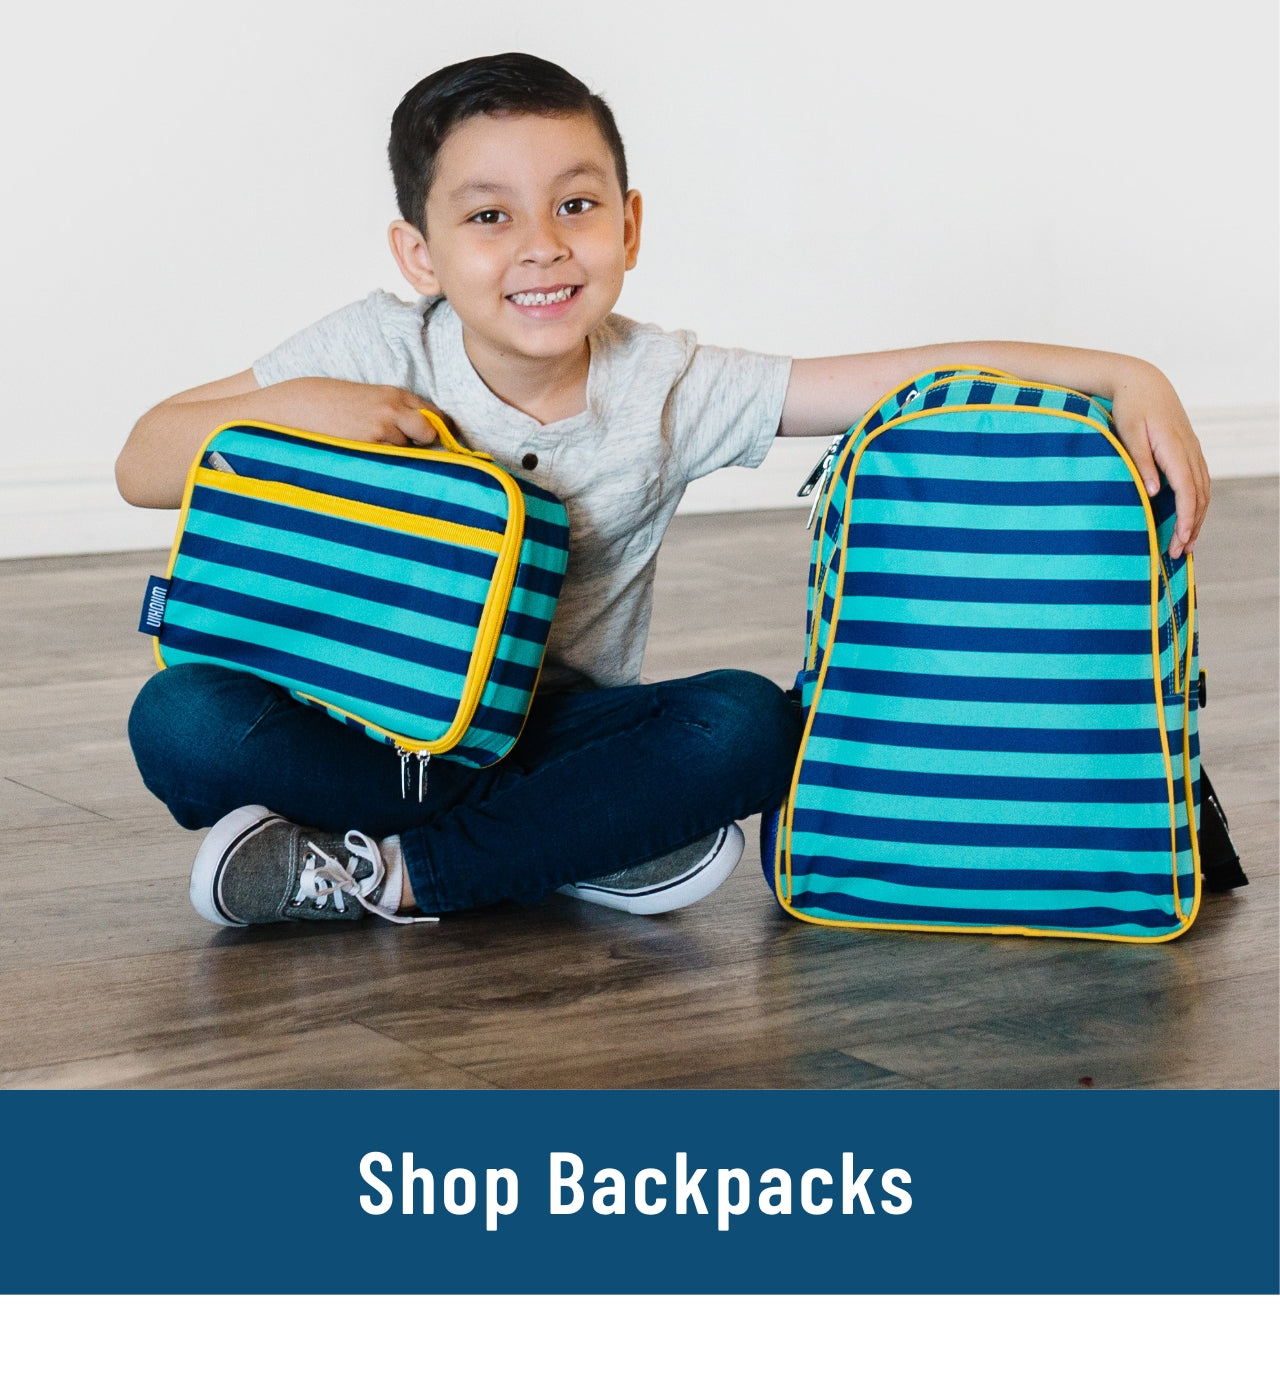 Link to shop backpacks. Image of boy sitting on floor with blue stripes backpack and lunch box